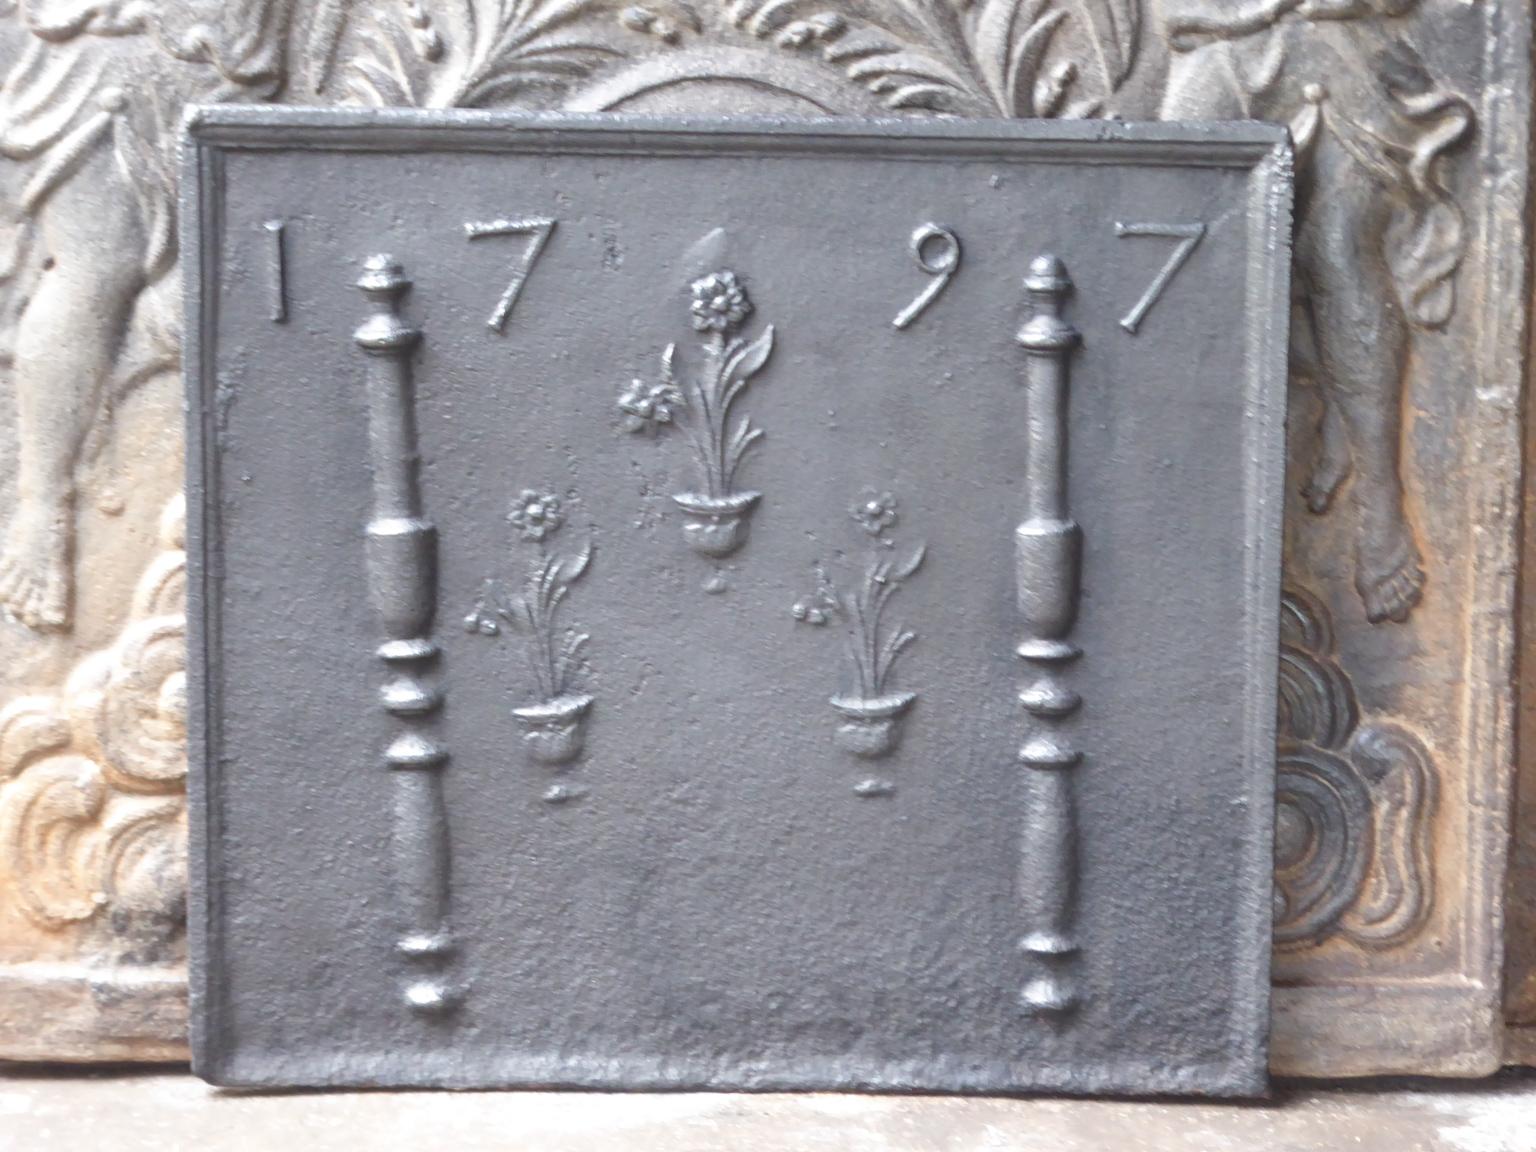 18th century Louis XV French fireback with pillars, flower vases and the date of production 1797. The pillars refer to the club of Hercules and stand for strength and the unknown.

The fireback is made of cast iron and has a black / pewter patina.